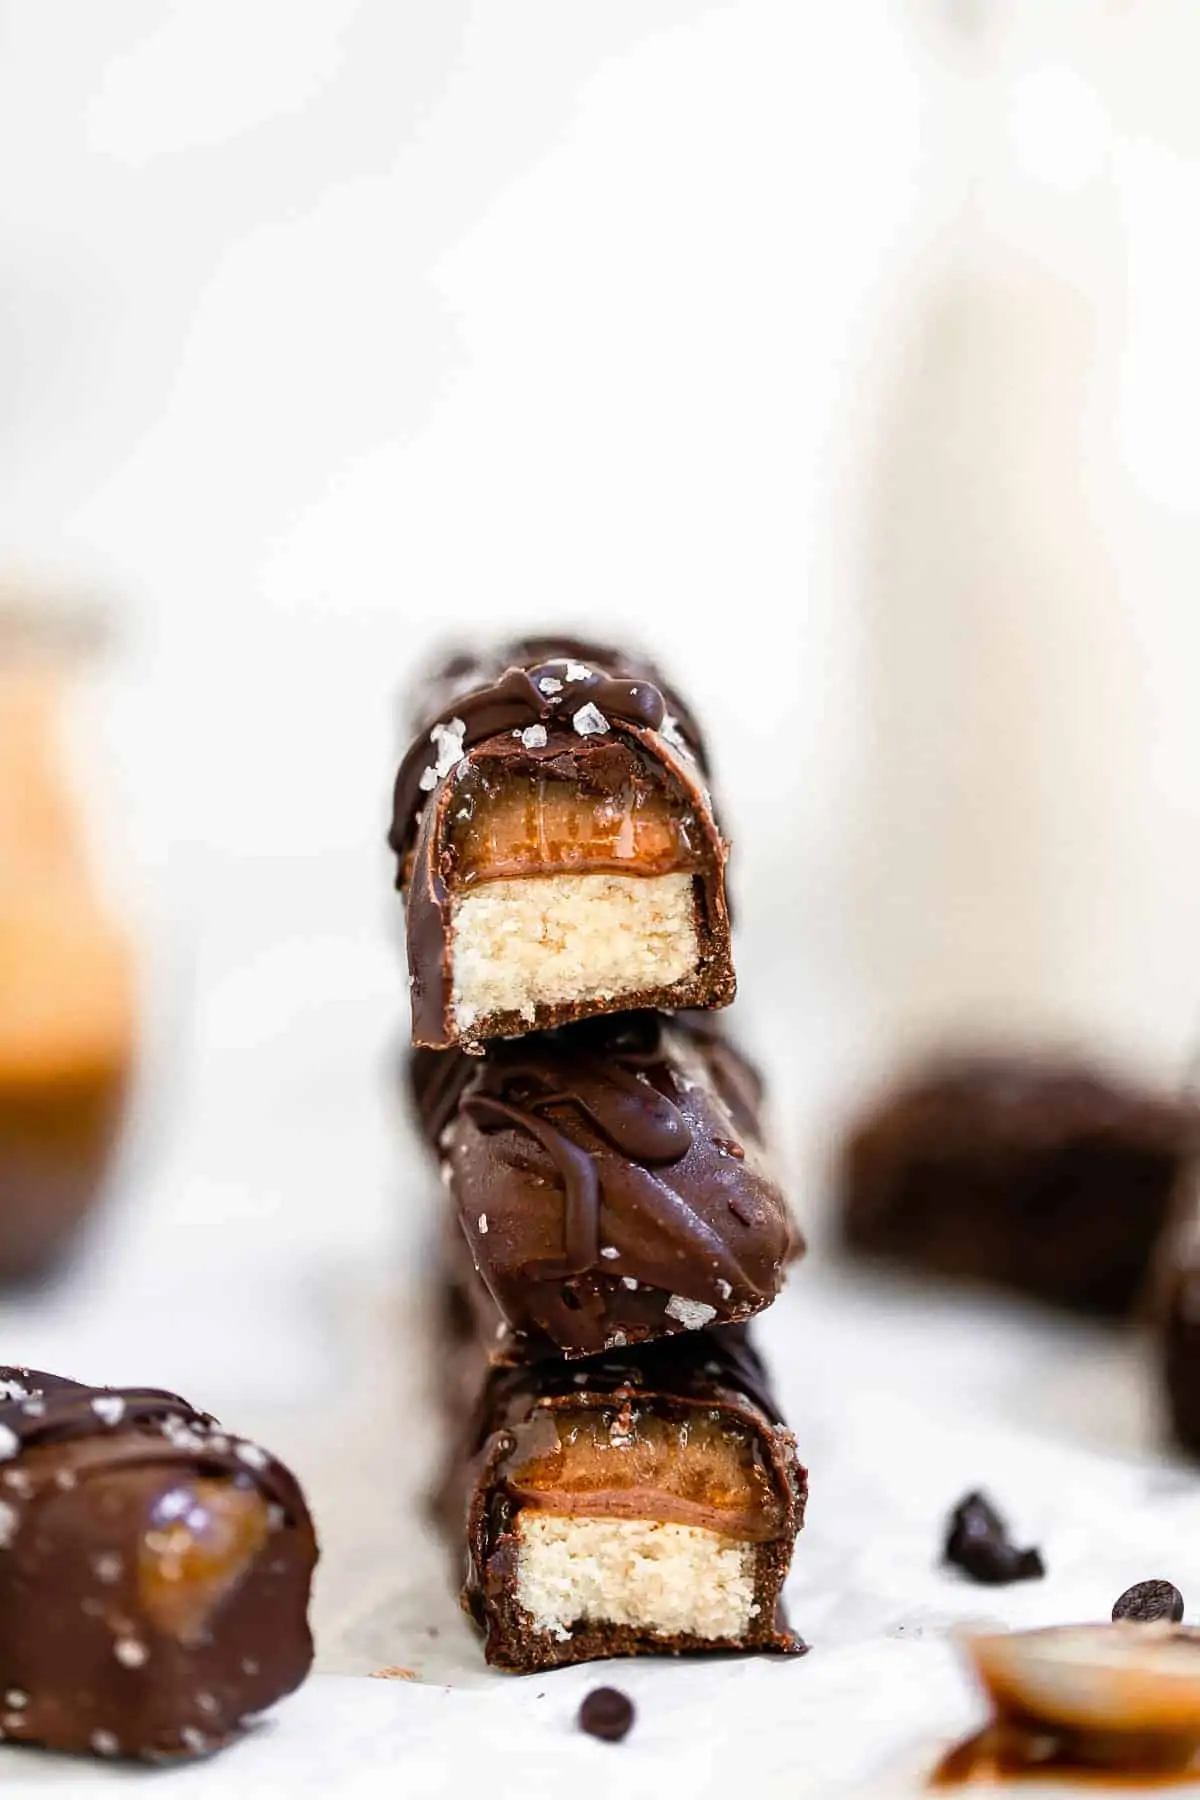 Homemade twix bars stacked on each other with bites taken out.